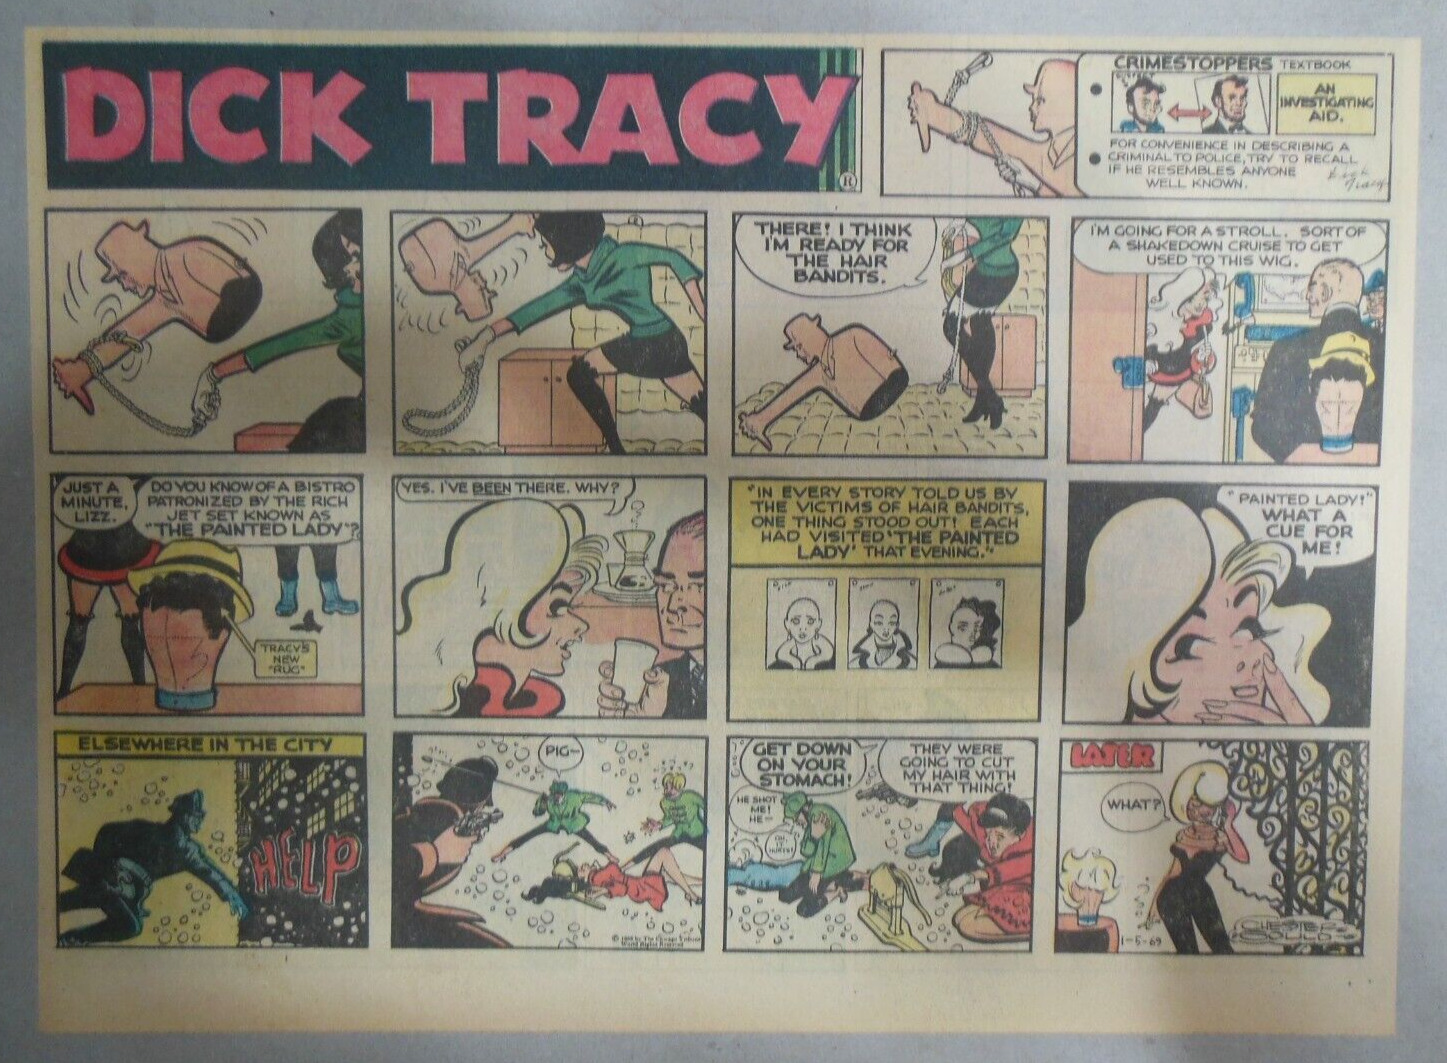 (50/52) Dick Tracy 1969 Sunday Pages by Chester Gould Size: 11 x 15 inches